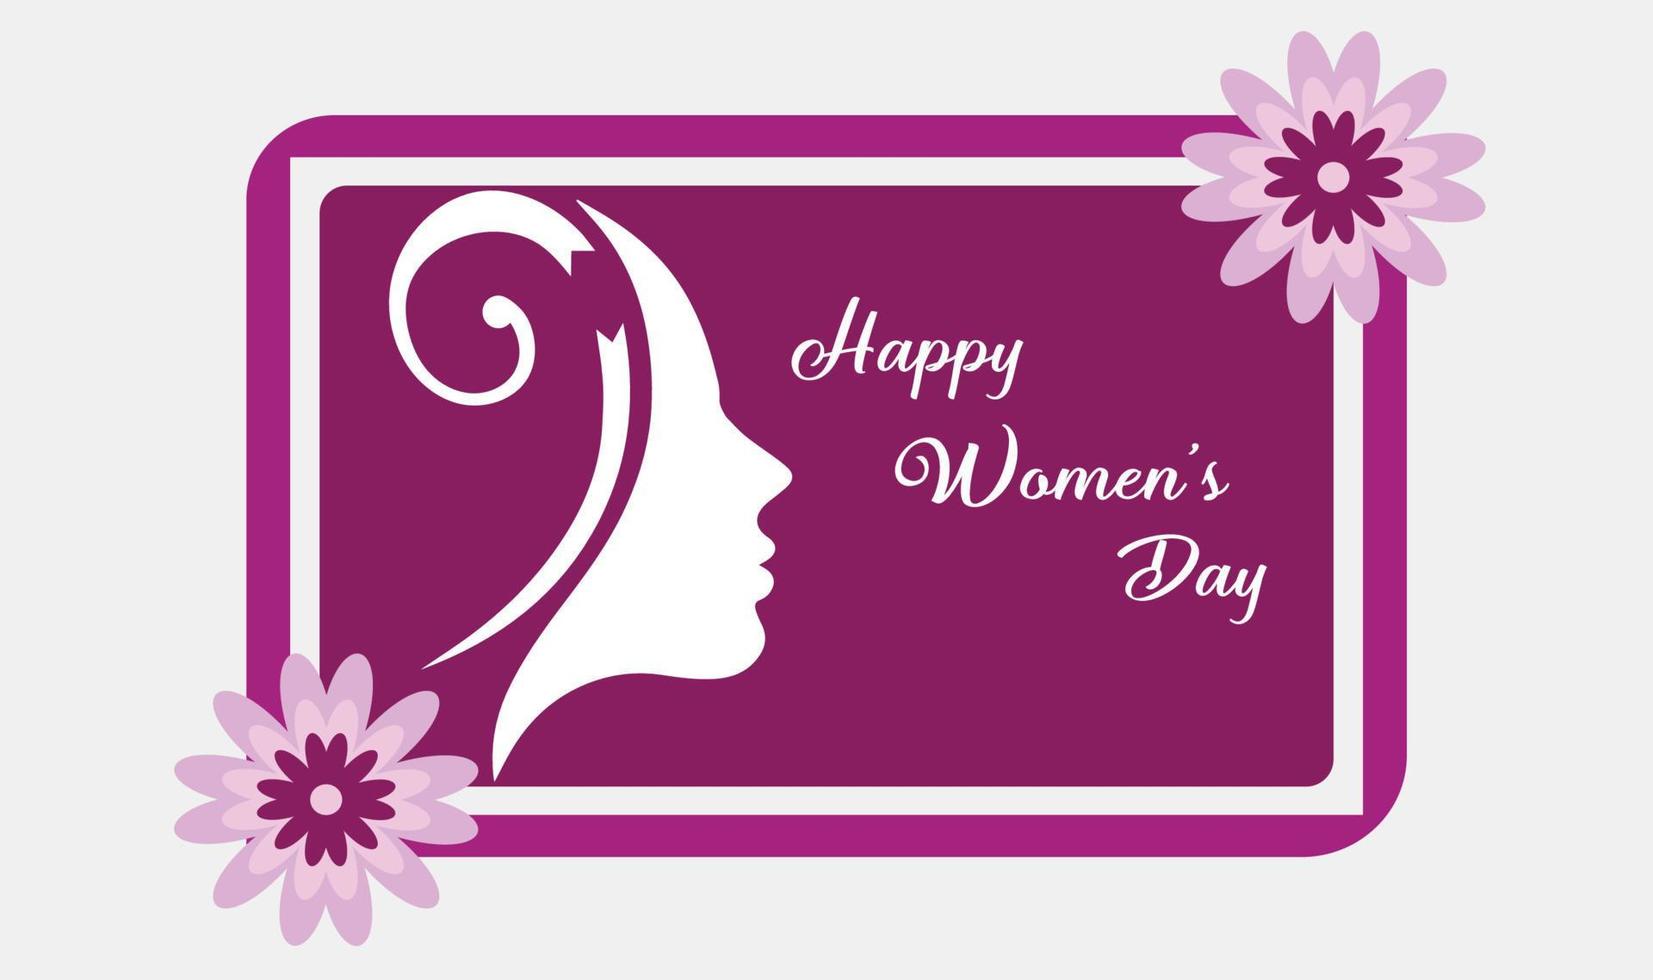 Happy Womens Day Greeting Card Background Design vector